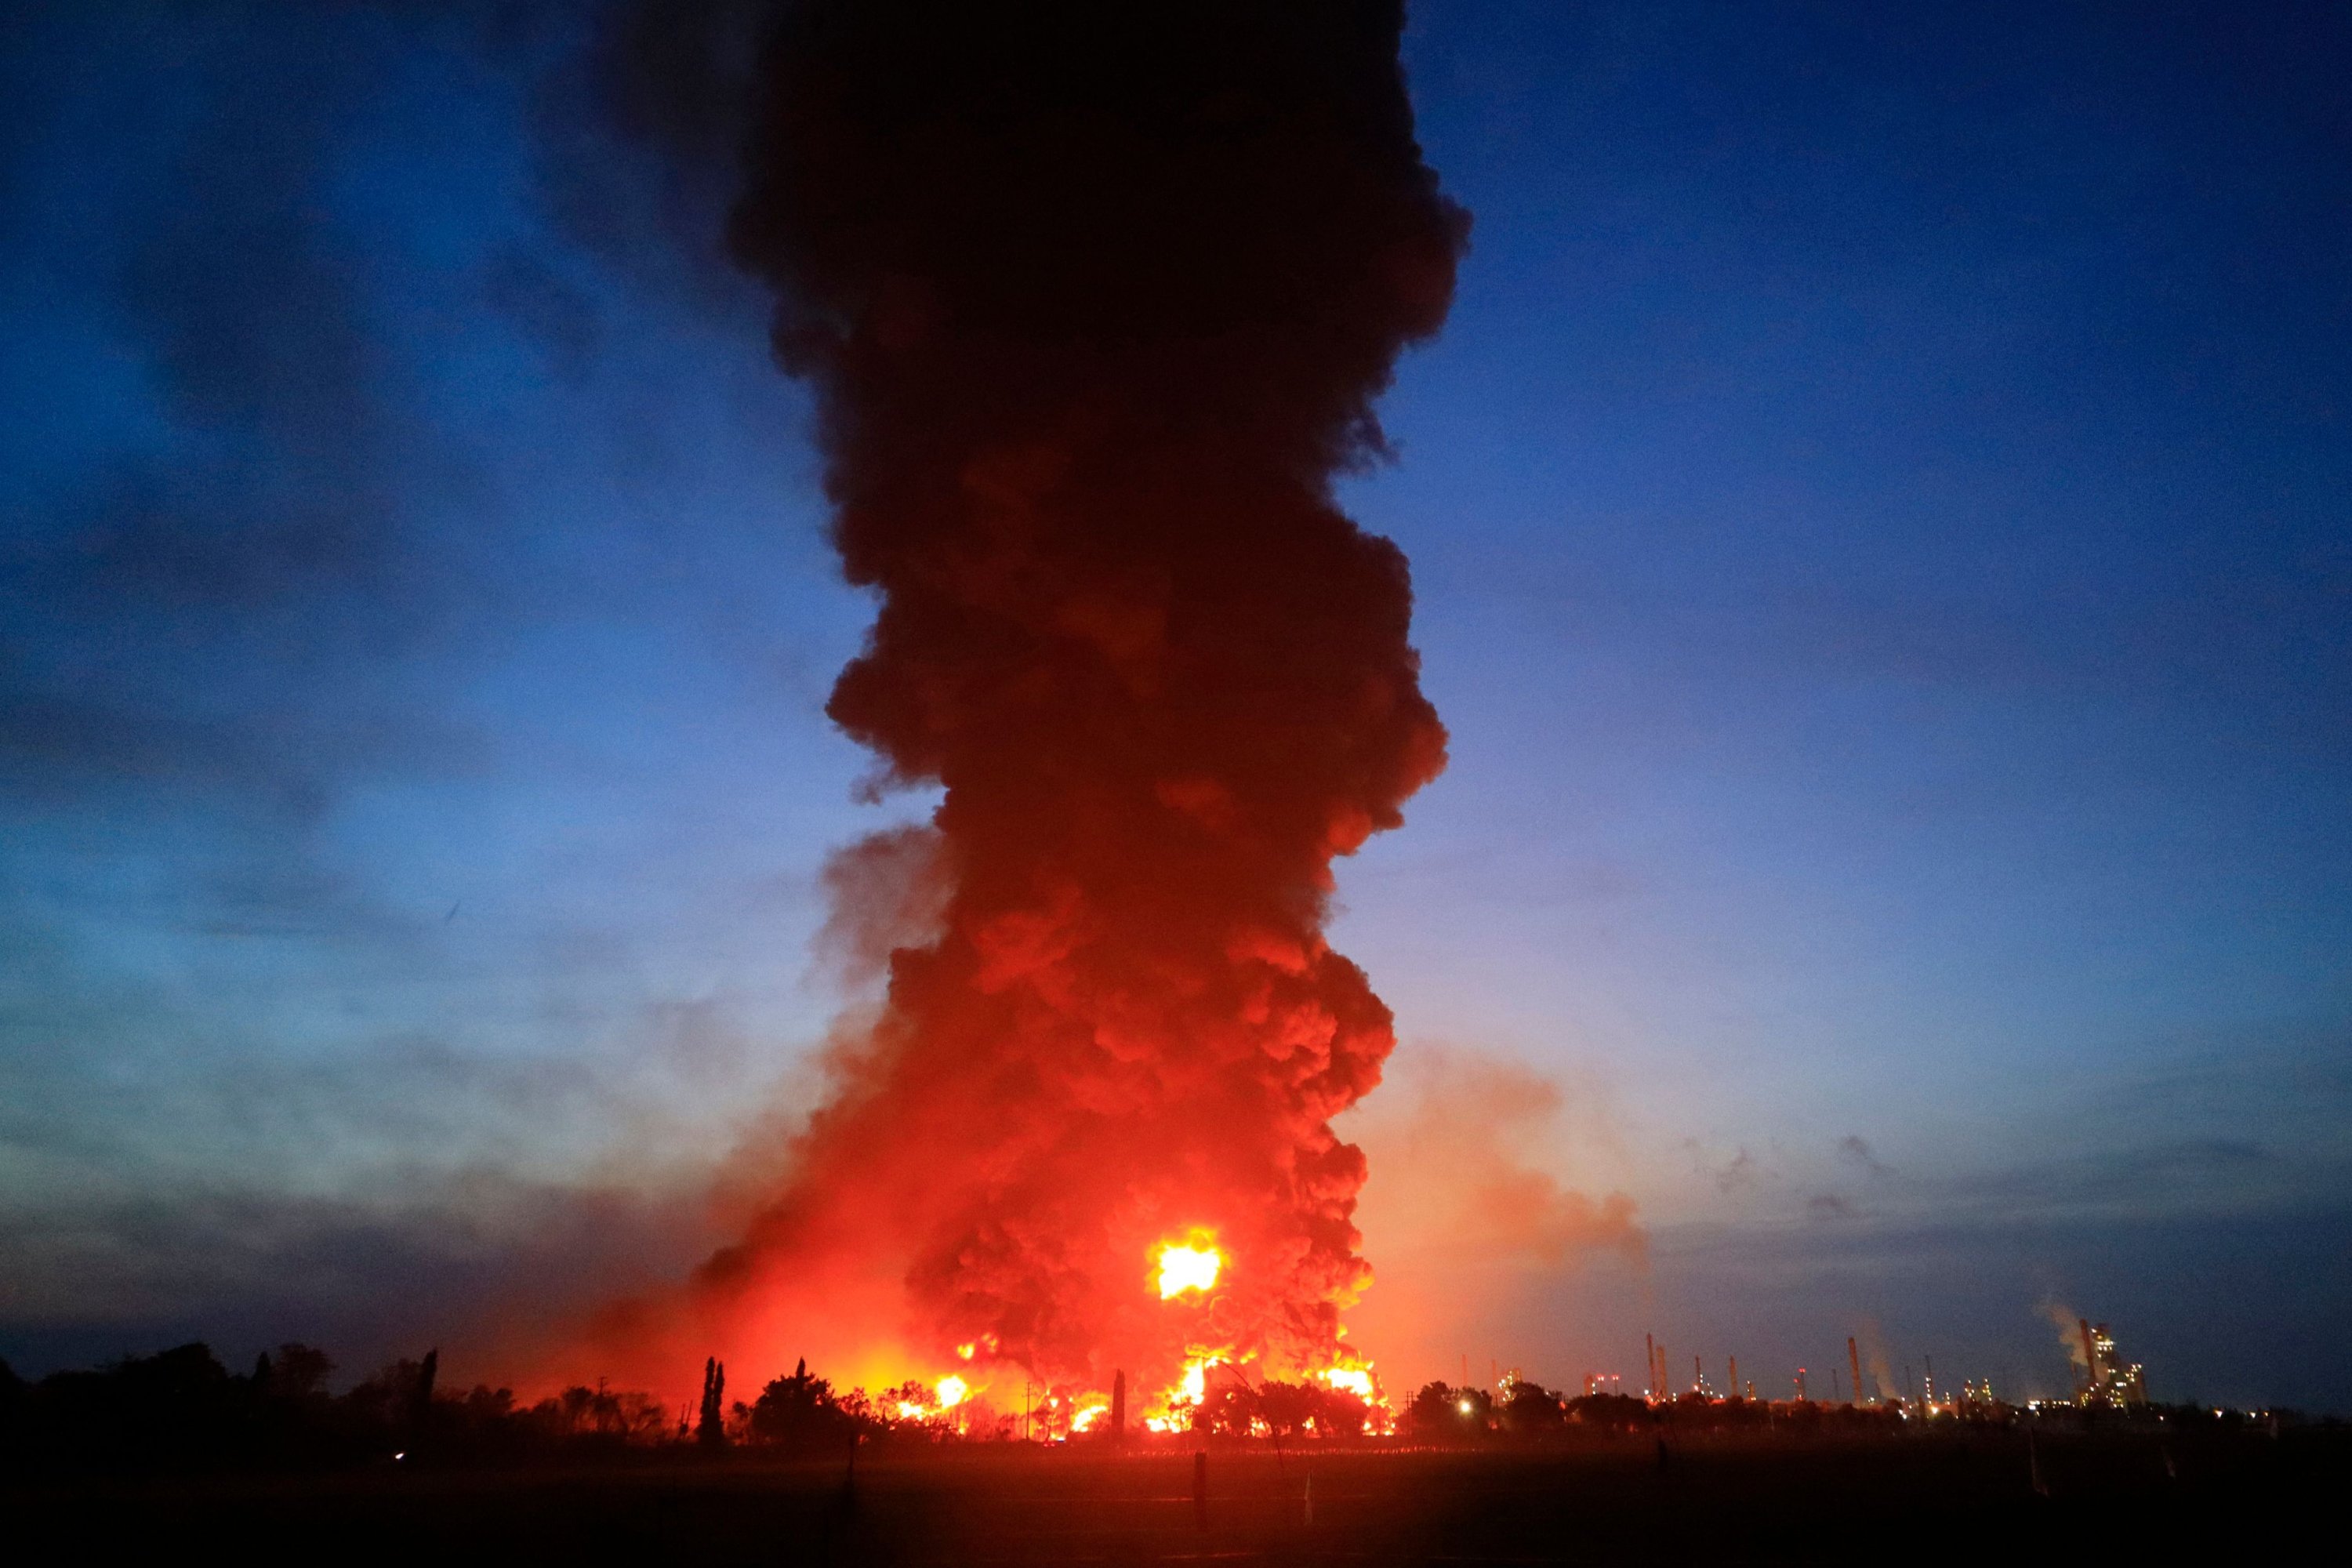 A massive fire rages at the Balongan refinery, operated by state oil company Pertamina, Indramayu, West Java, March 29, 2021. (AFP Photo)